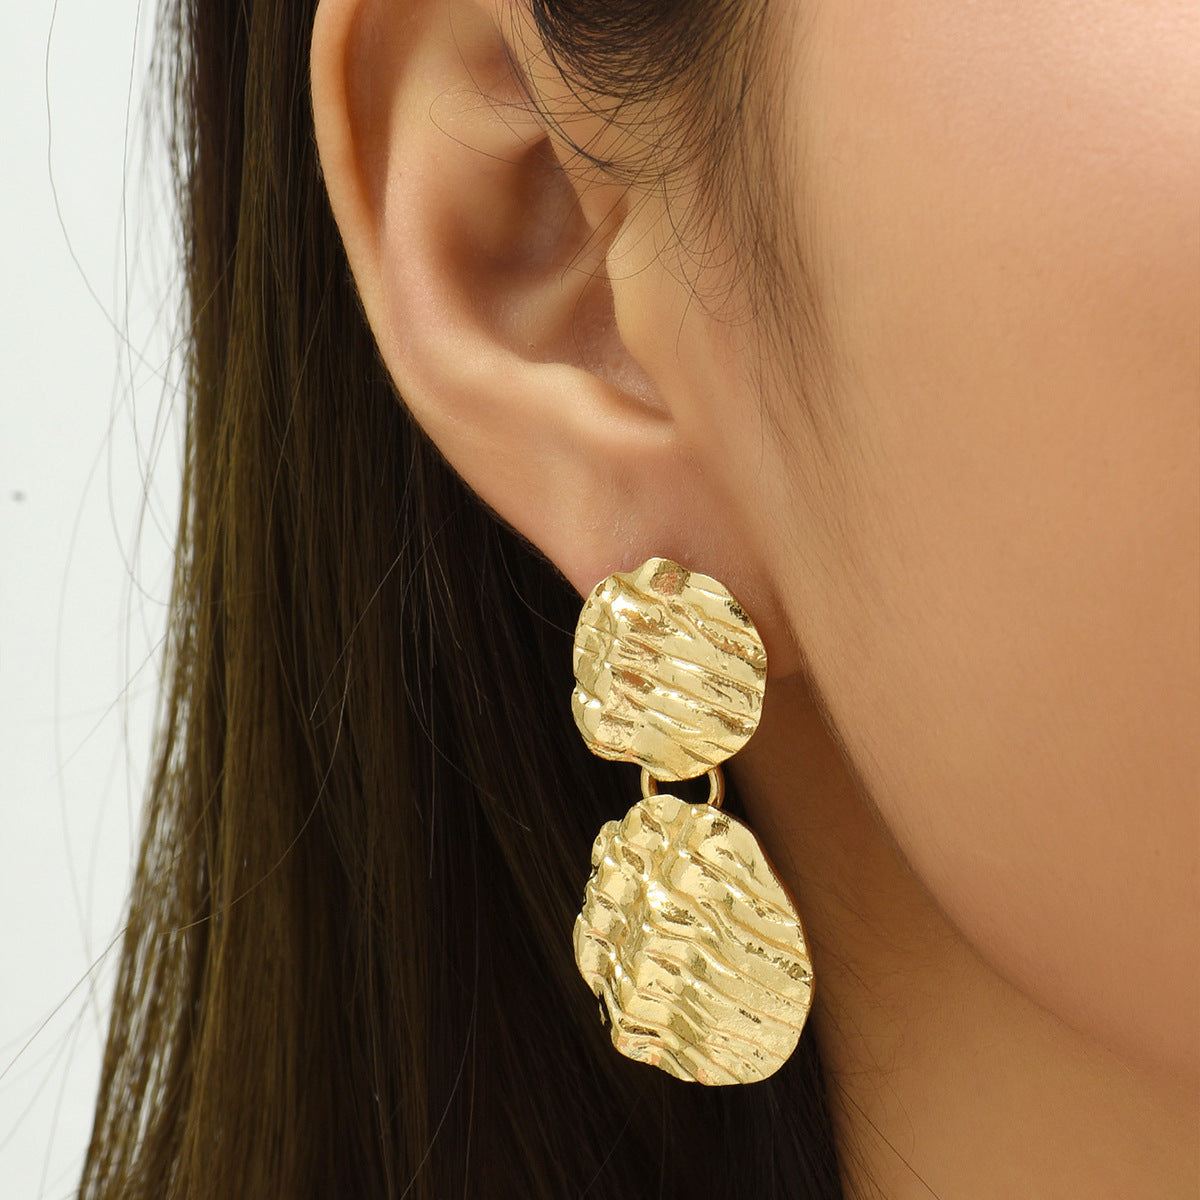 Nugget Jewelry Gold Double Disc Carved Hammered Earrings nugget earrings